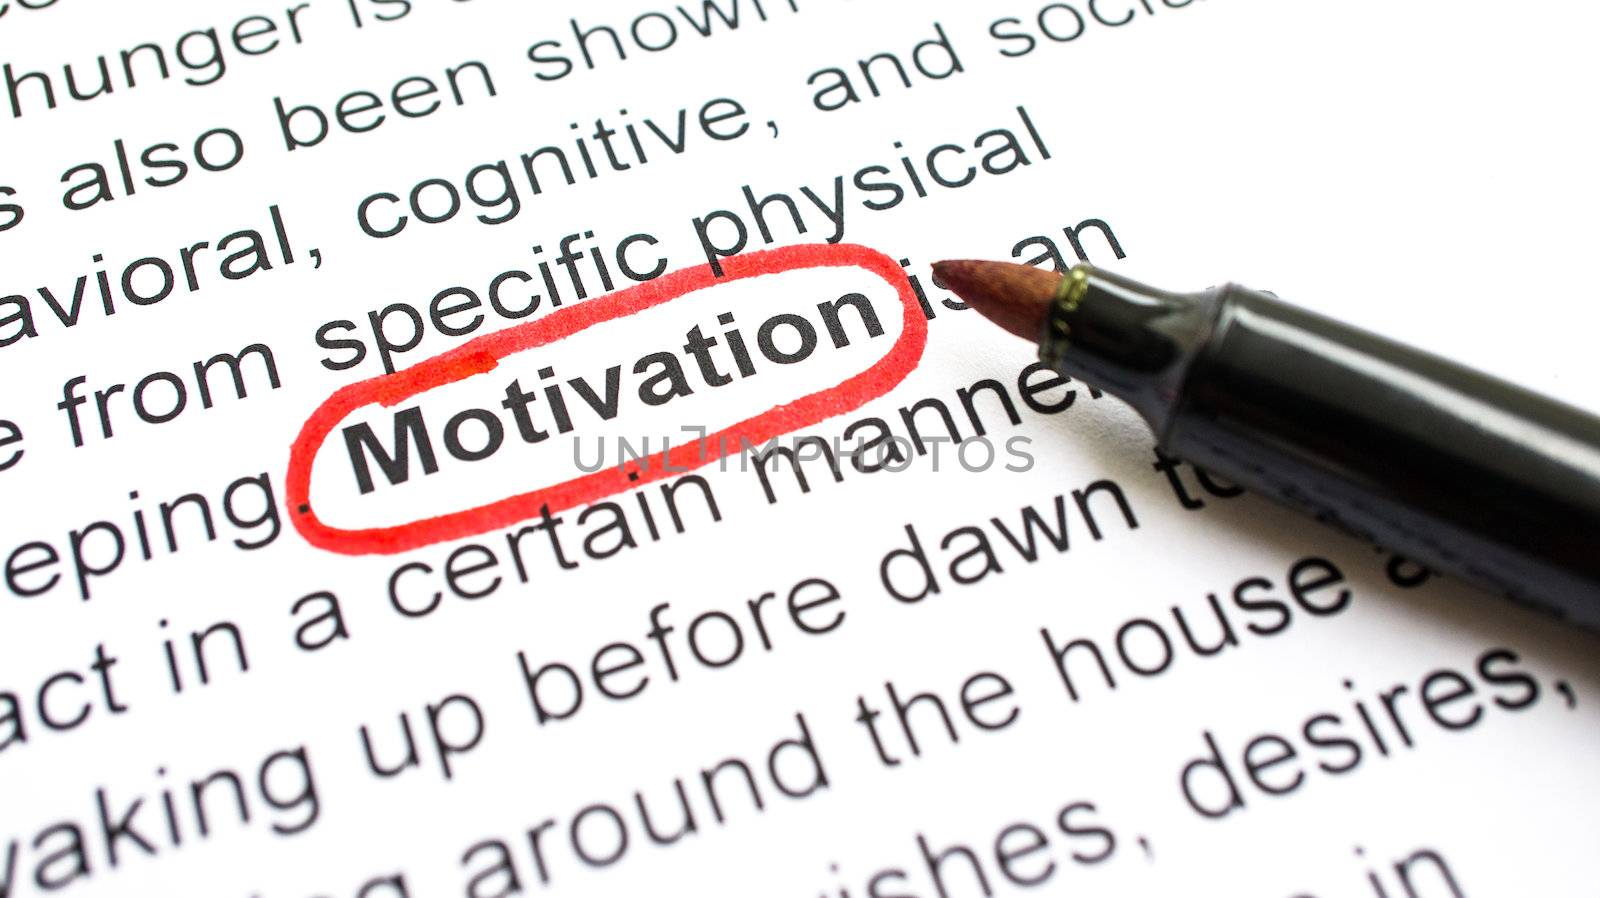 Motivation explanation with heading circled in red